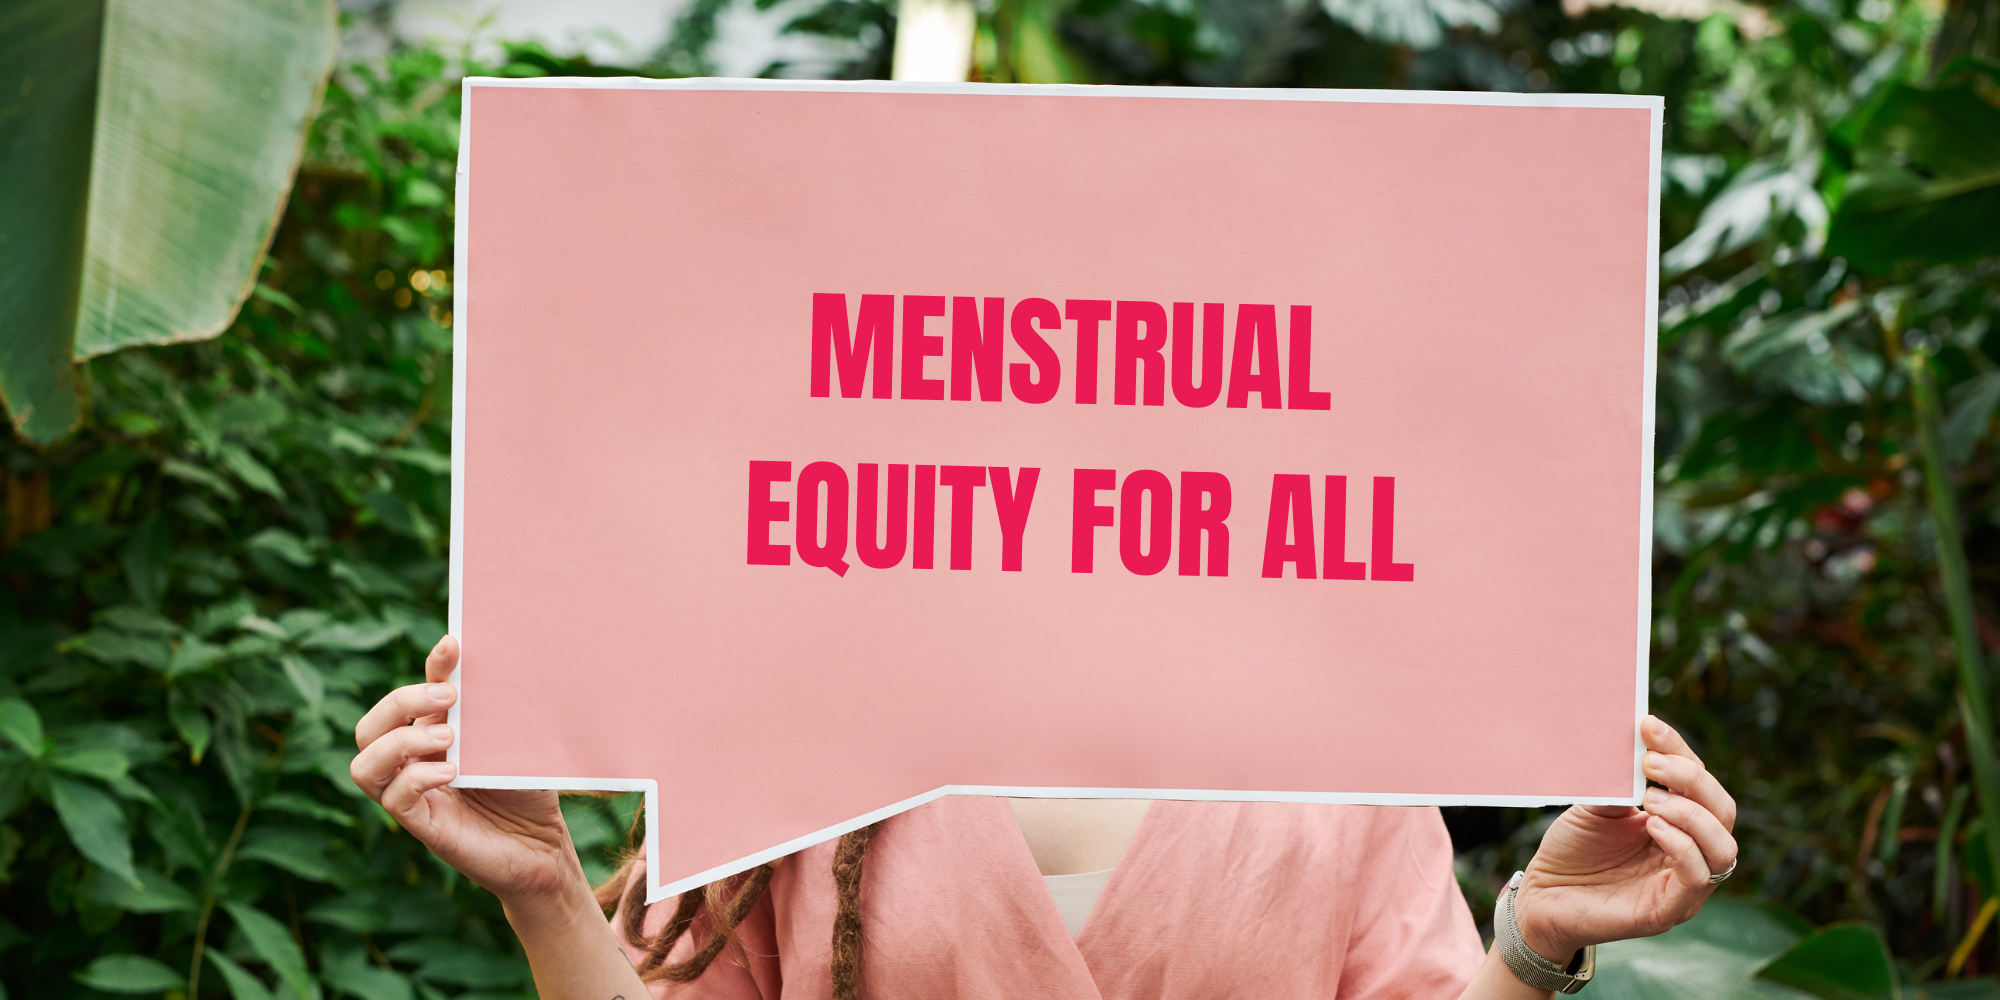 H.R.1467 - The Menstrual Equity for All Act